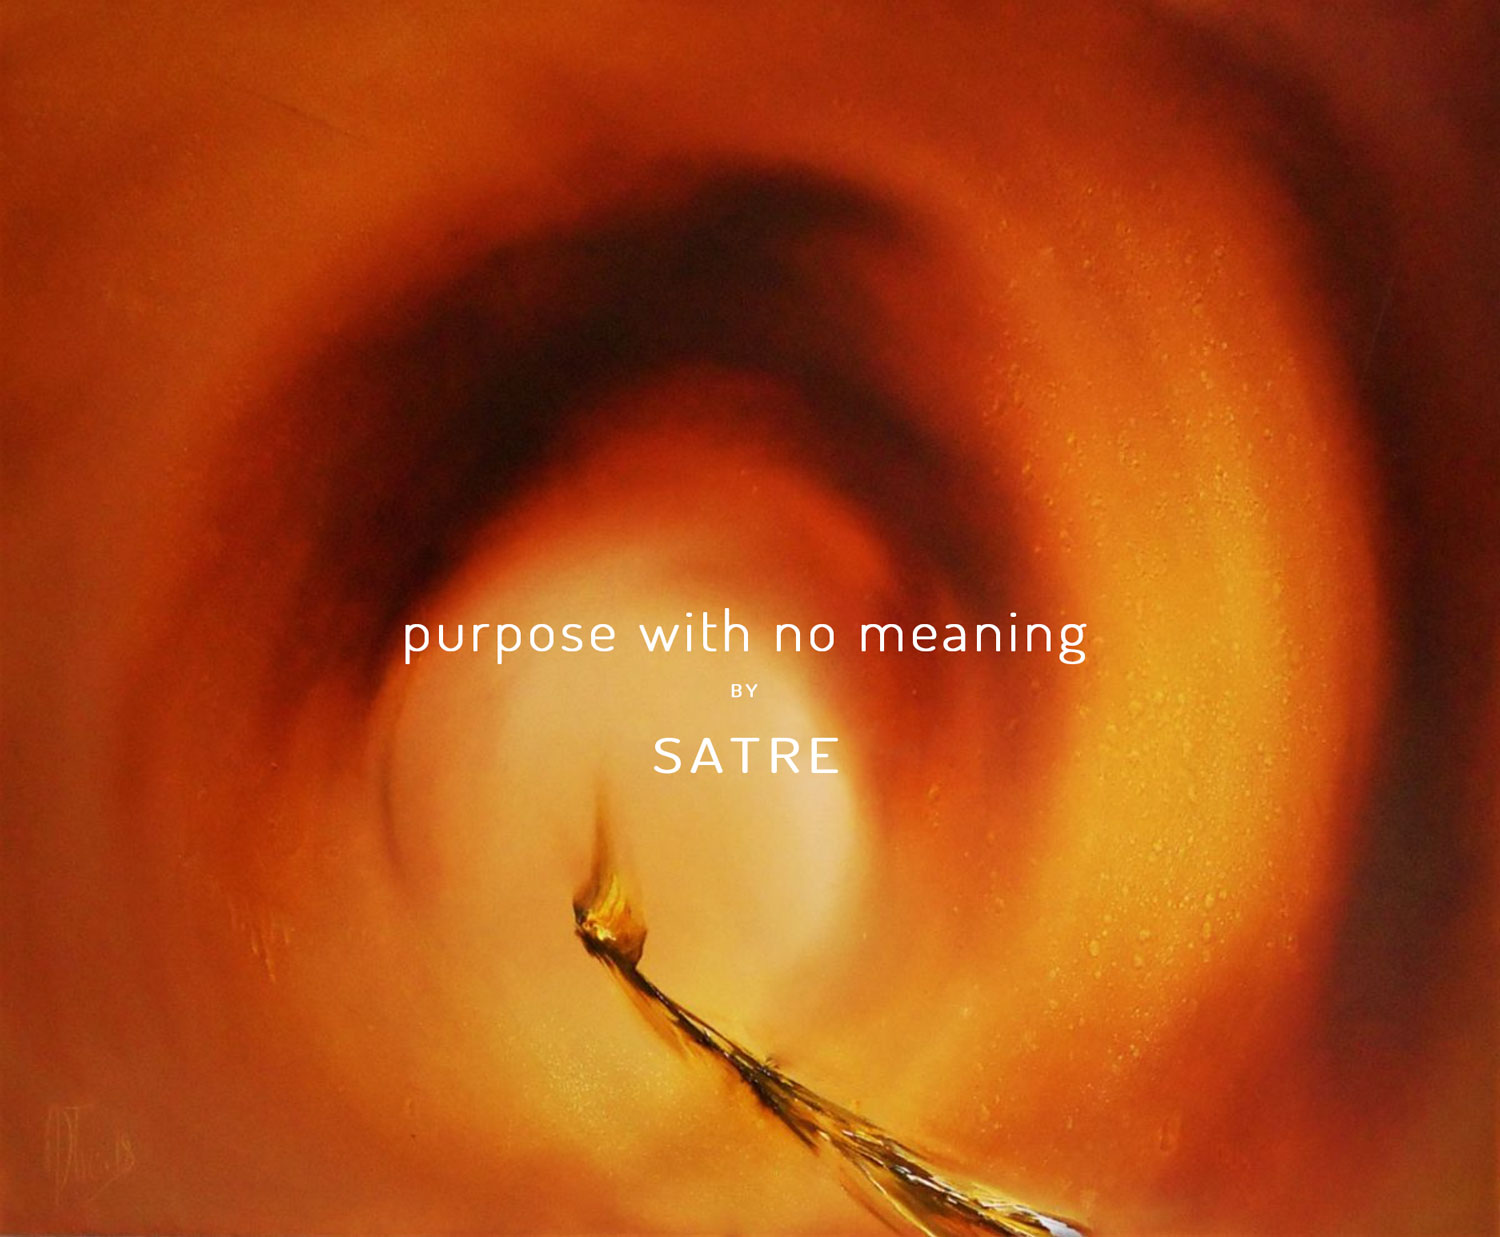 Purpose-WIth-No-Meaning-front-1500-geir-satre.jpg